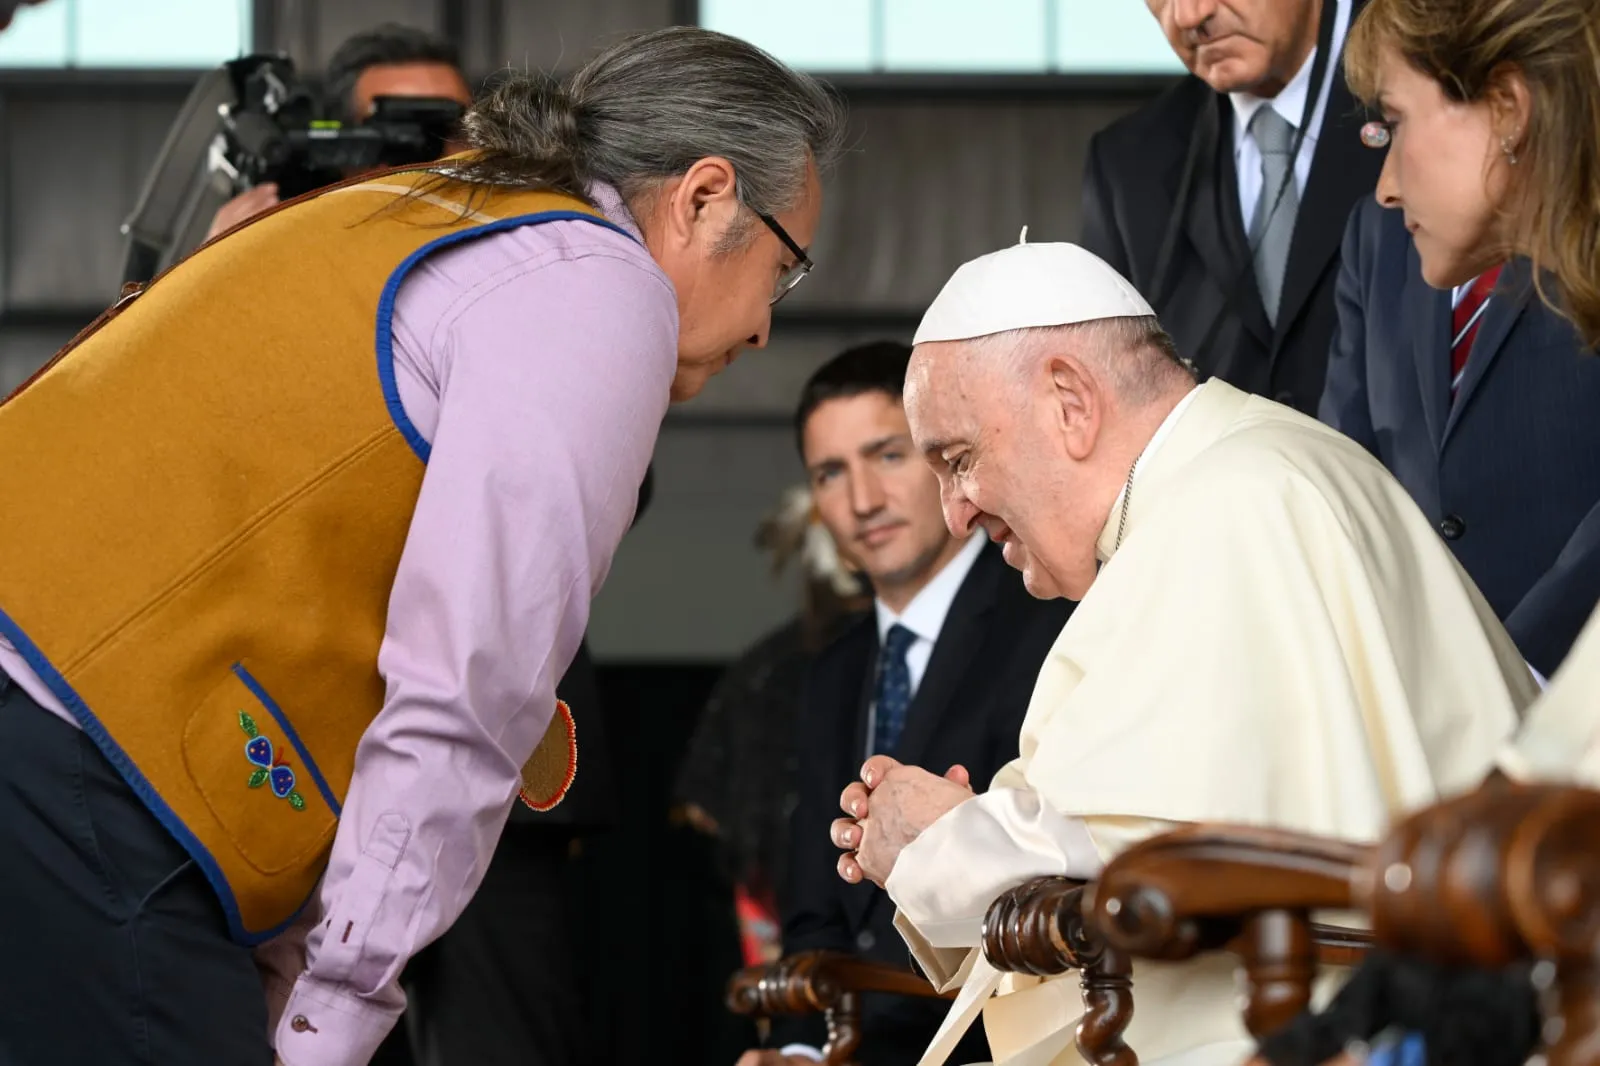 Pope Francis meets representatives of Canada's indigenous peoples in the hangar of the airport in Edmonton on July 24, 2022, as Canadian Prime Minister Justin Trudeau (center) and other look on. Vatican Media